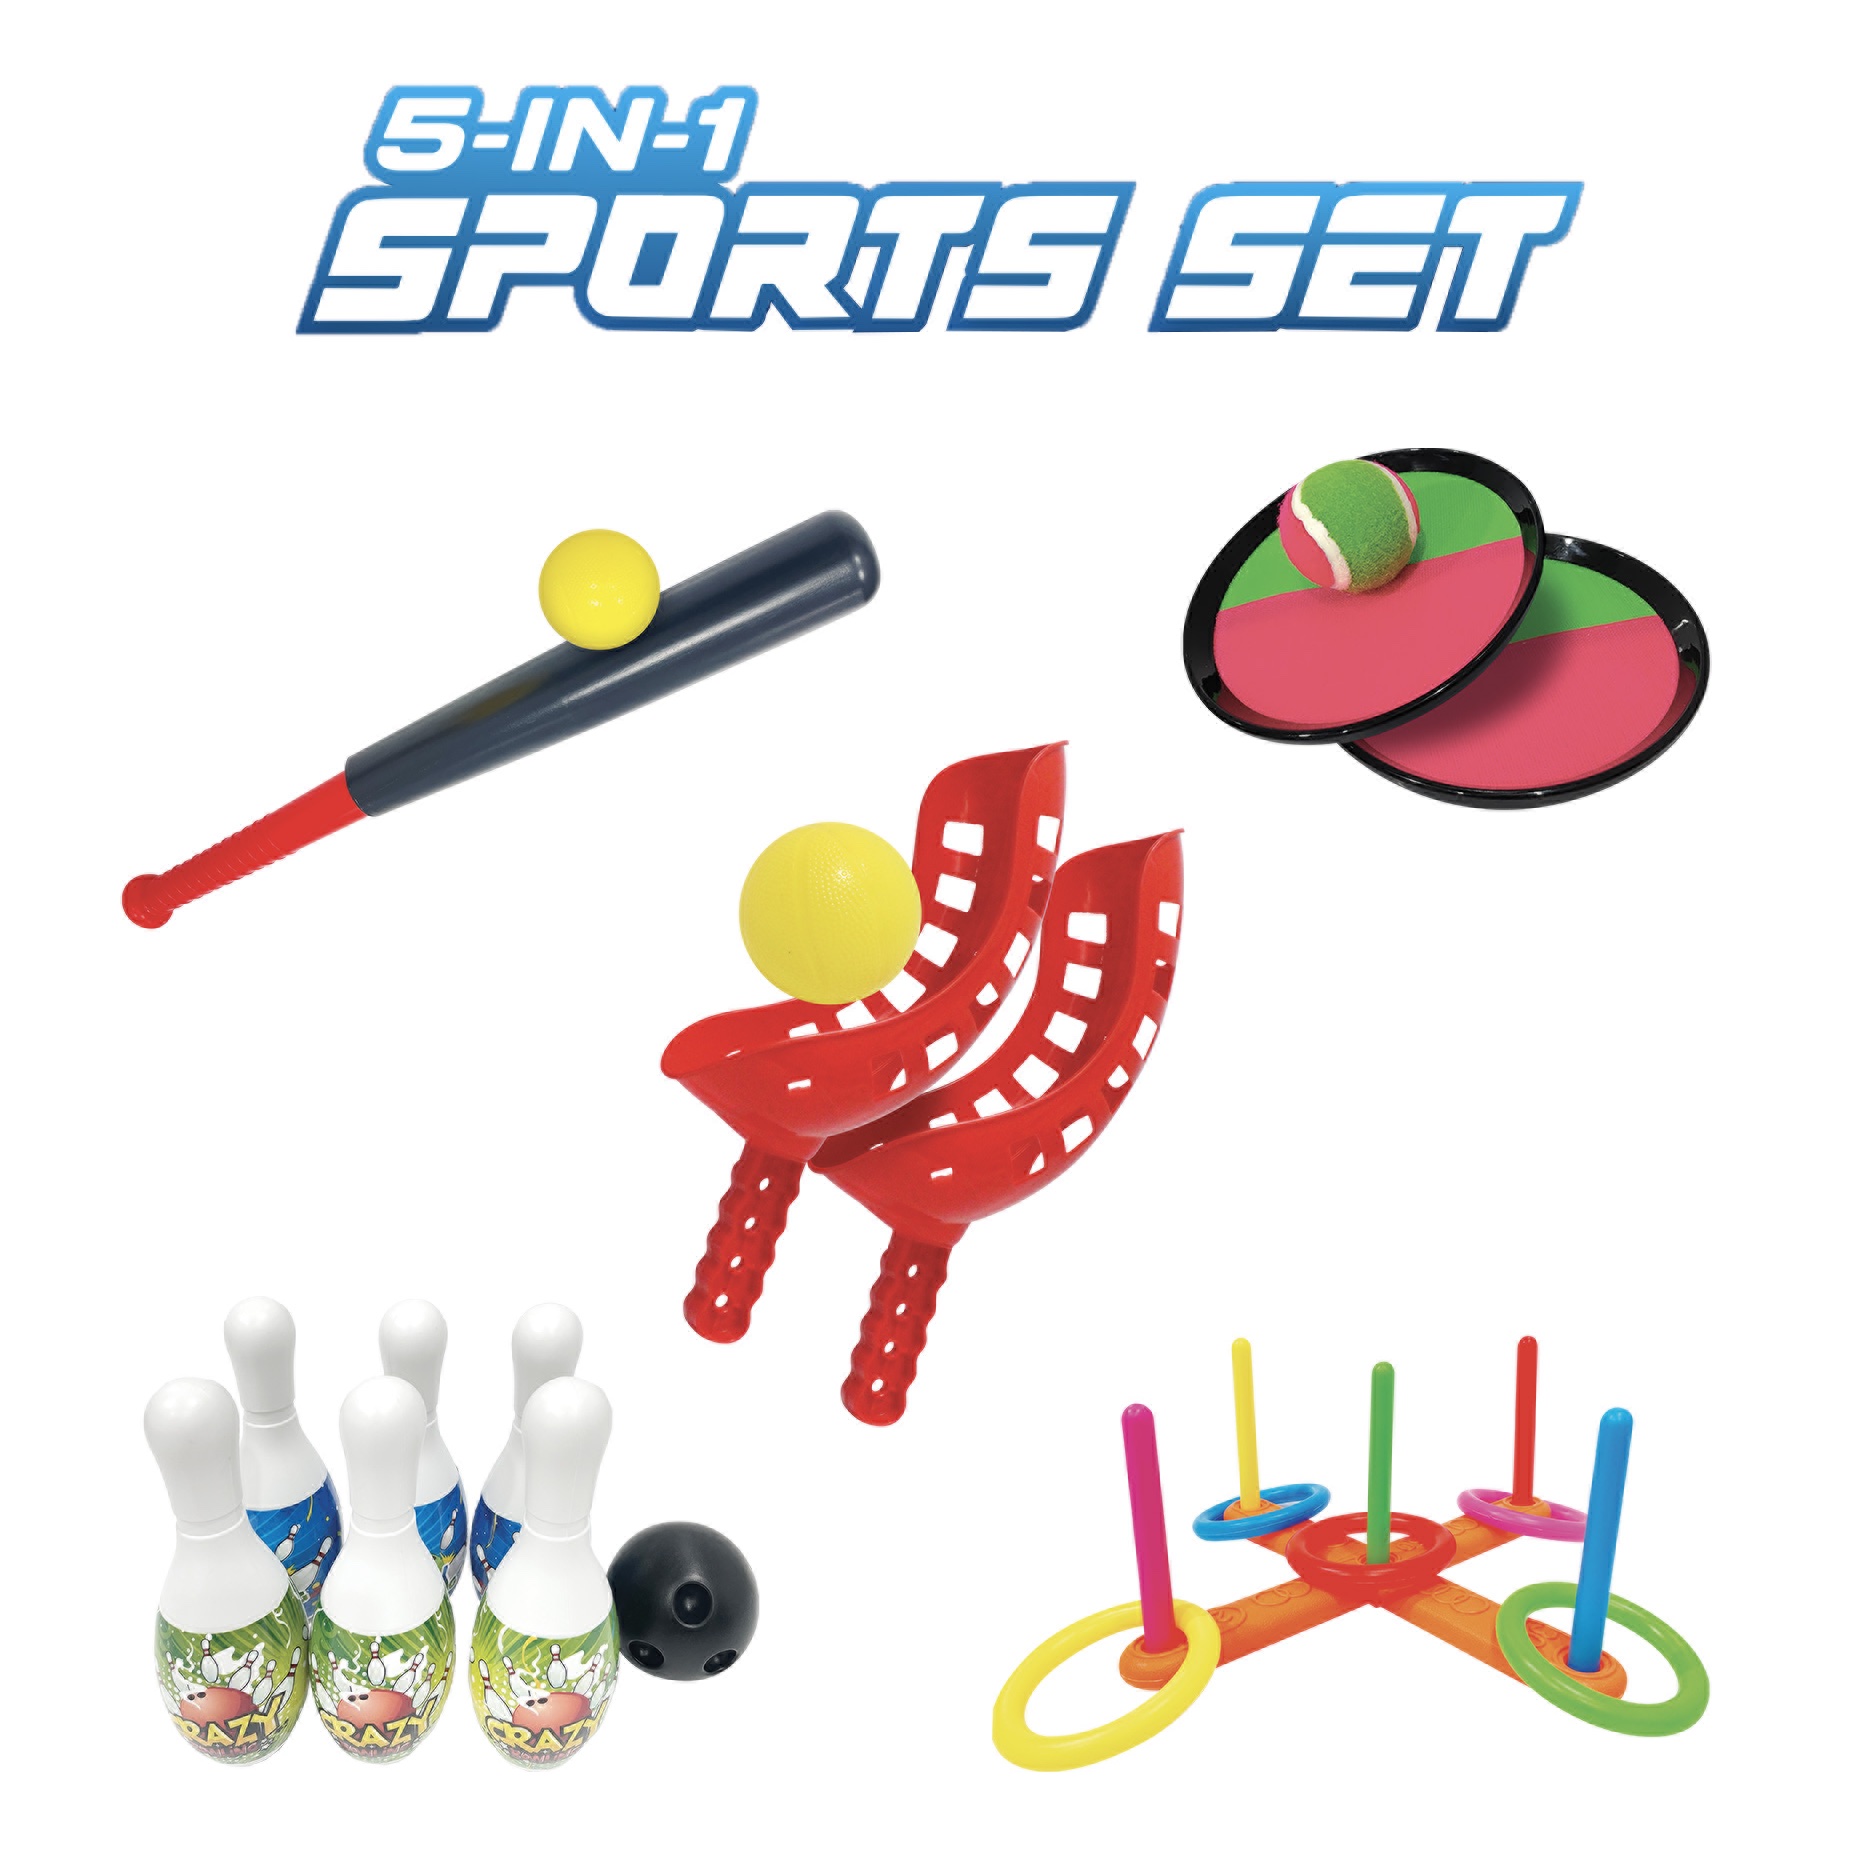 MinnARK 5-in-1 Sports Set, Family Games, Outdoor Yard Games, Beach Games, Jr. Sports - image 1 of 9